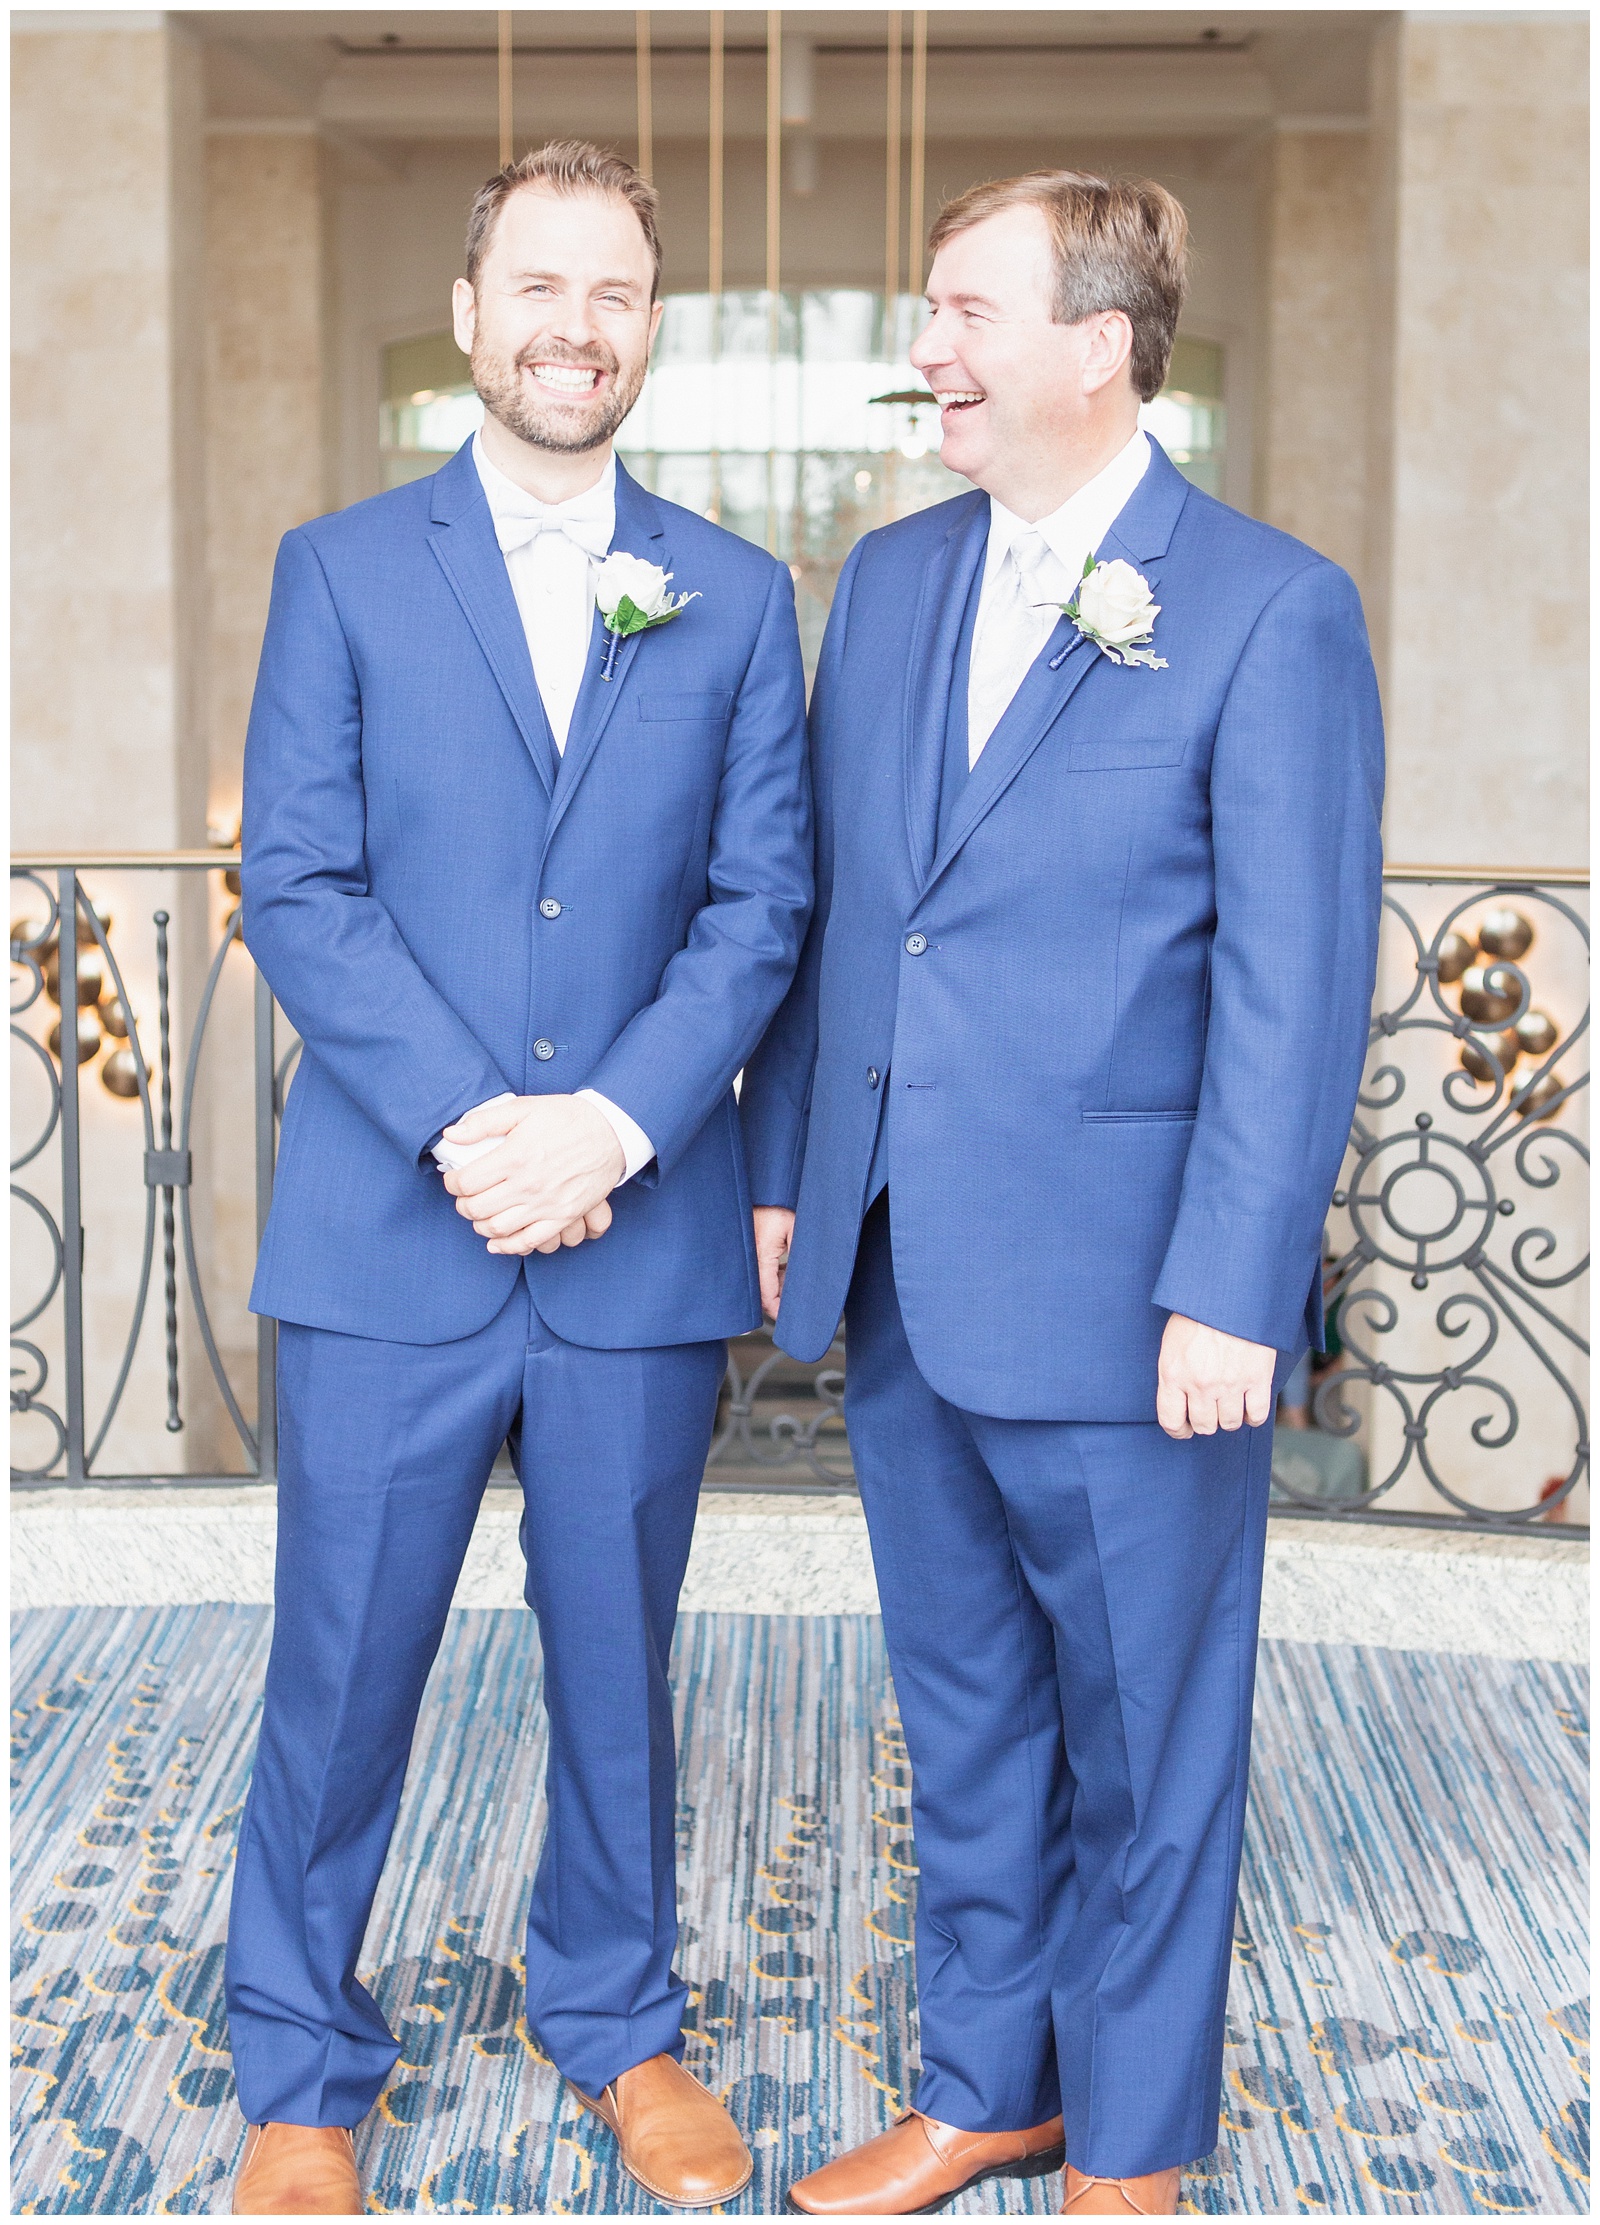 Groom with best man | Matlock and Kelly Photography